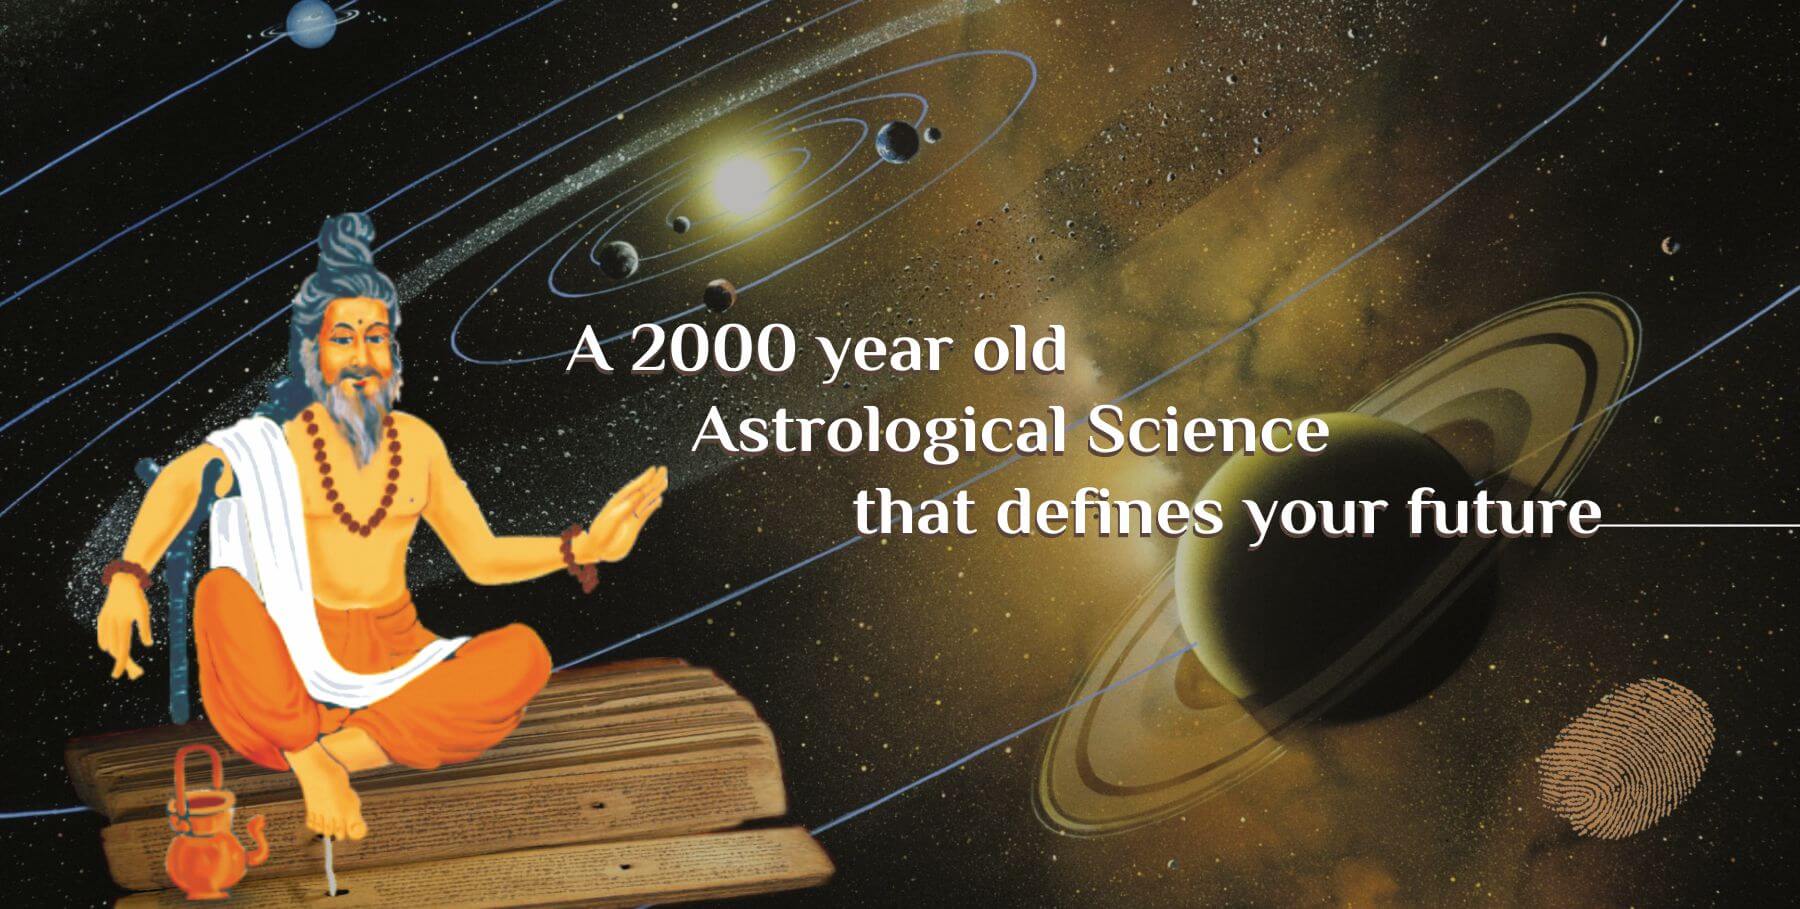 A 2000 year old Astrological Science that defines your future